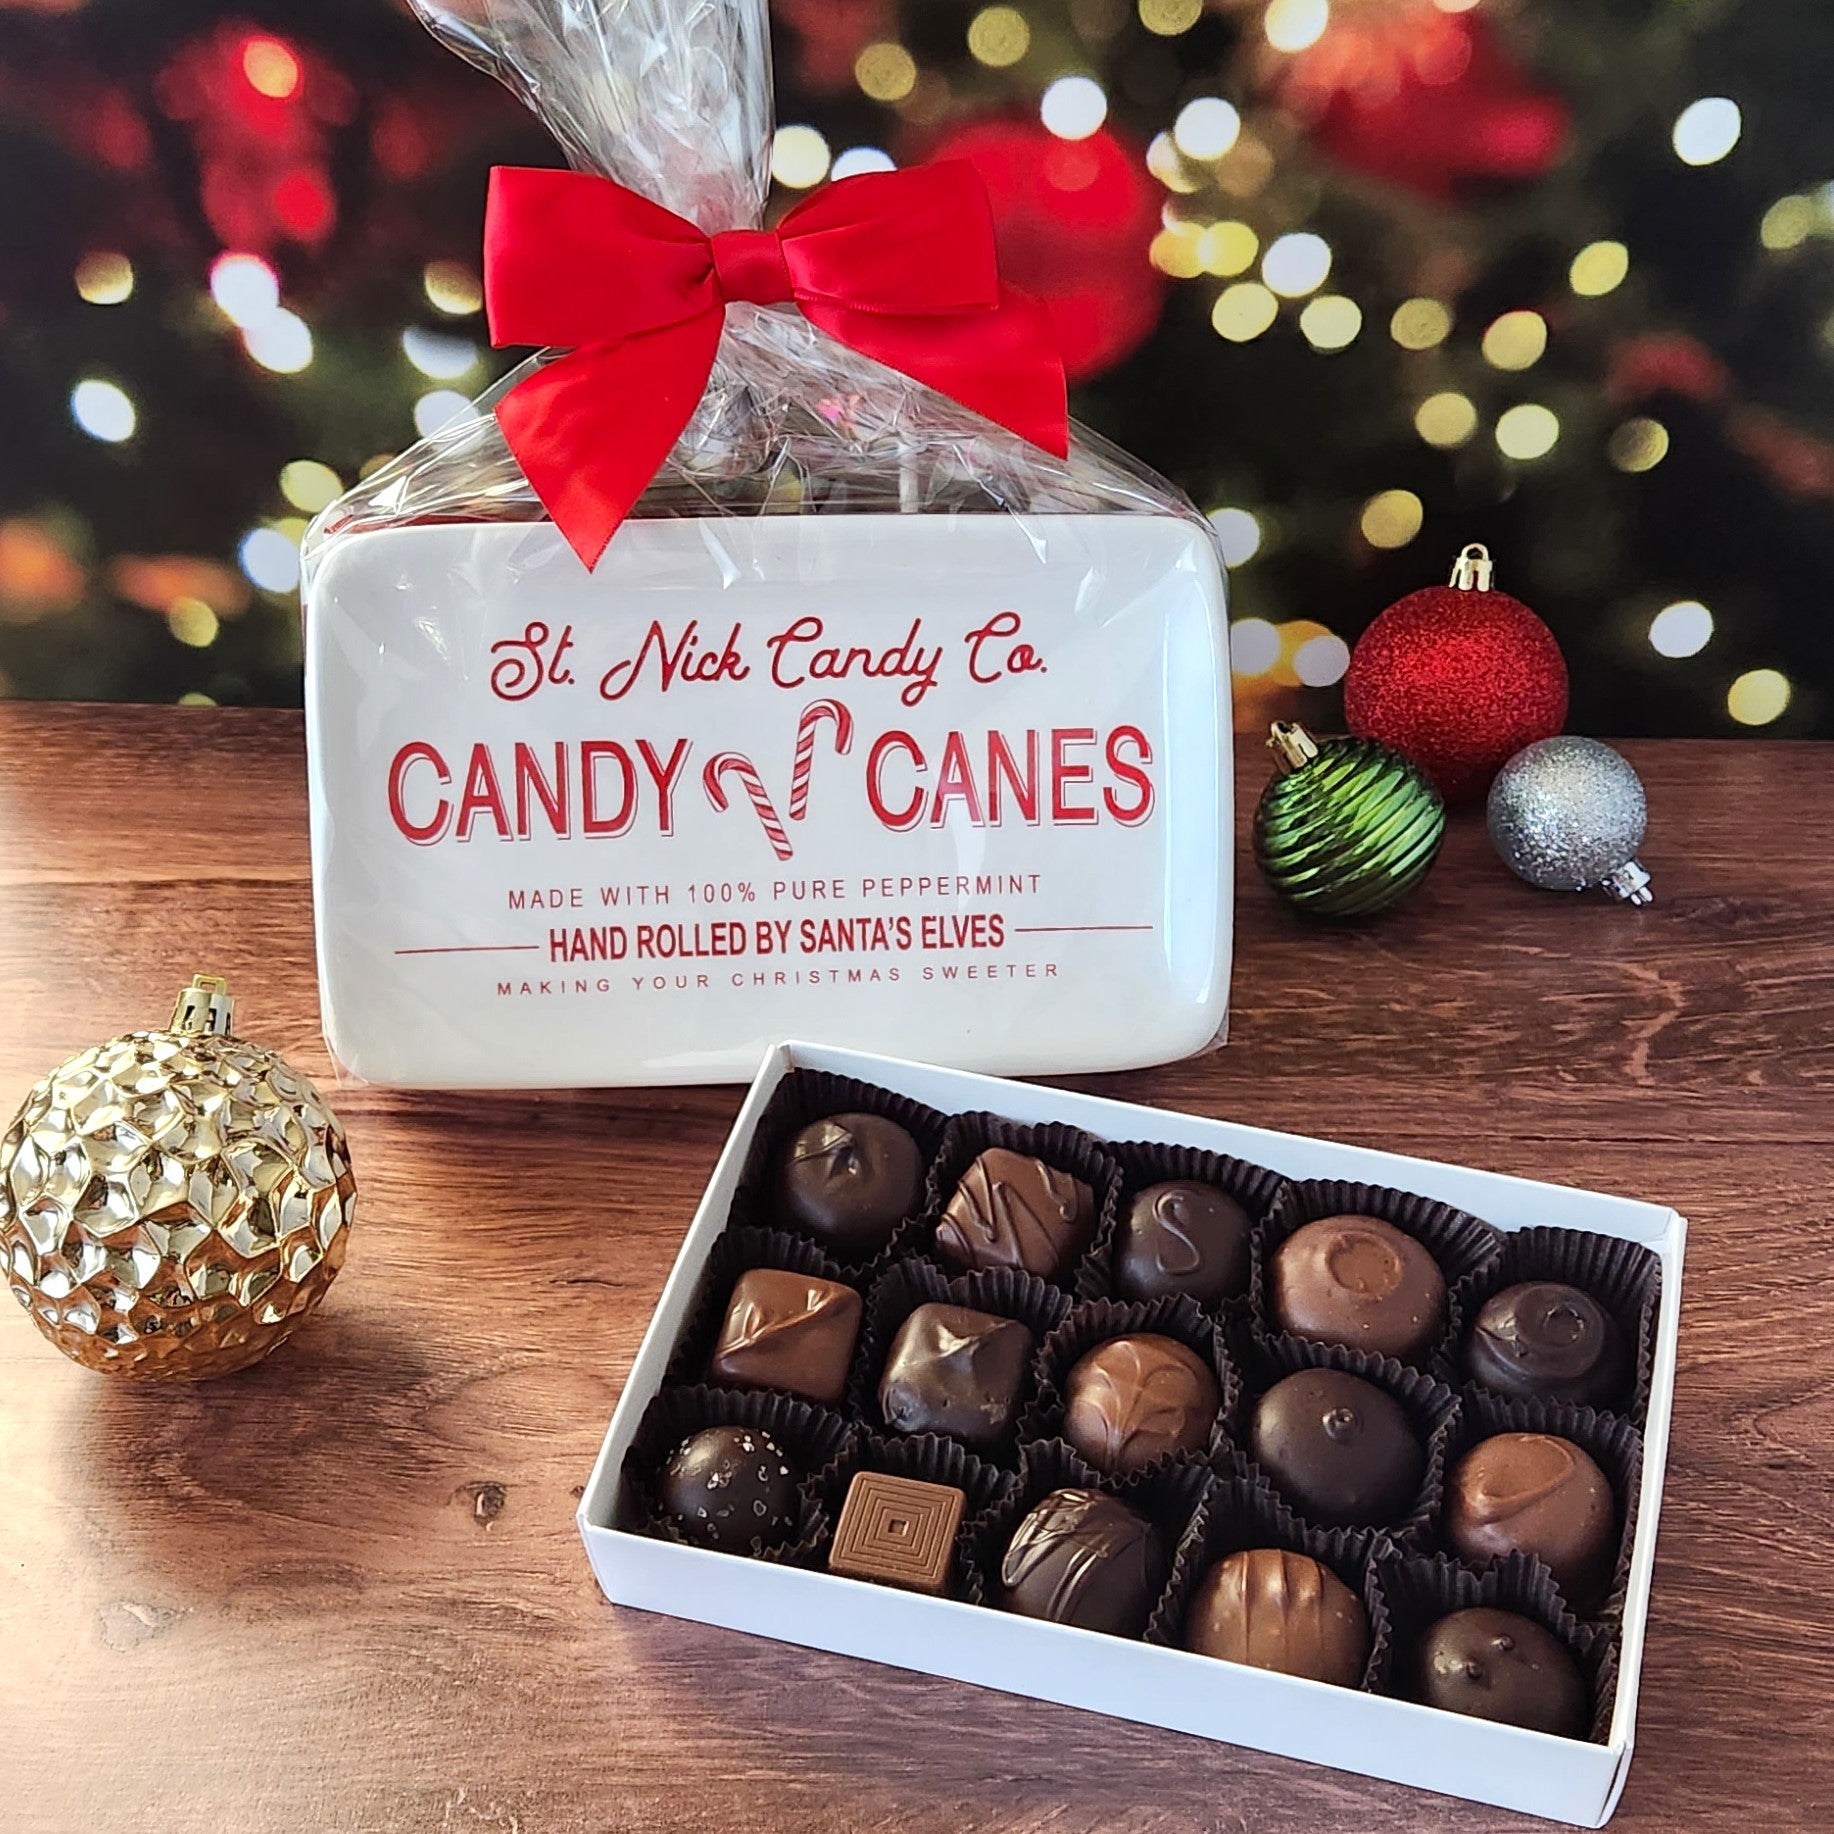 Enjoy  a 15 piece popular assortment of Stage Stop Candy's milk and dark chocolates on a candy tray saying "St. Nick Candy Co. Candy Canes"